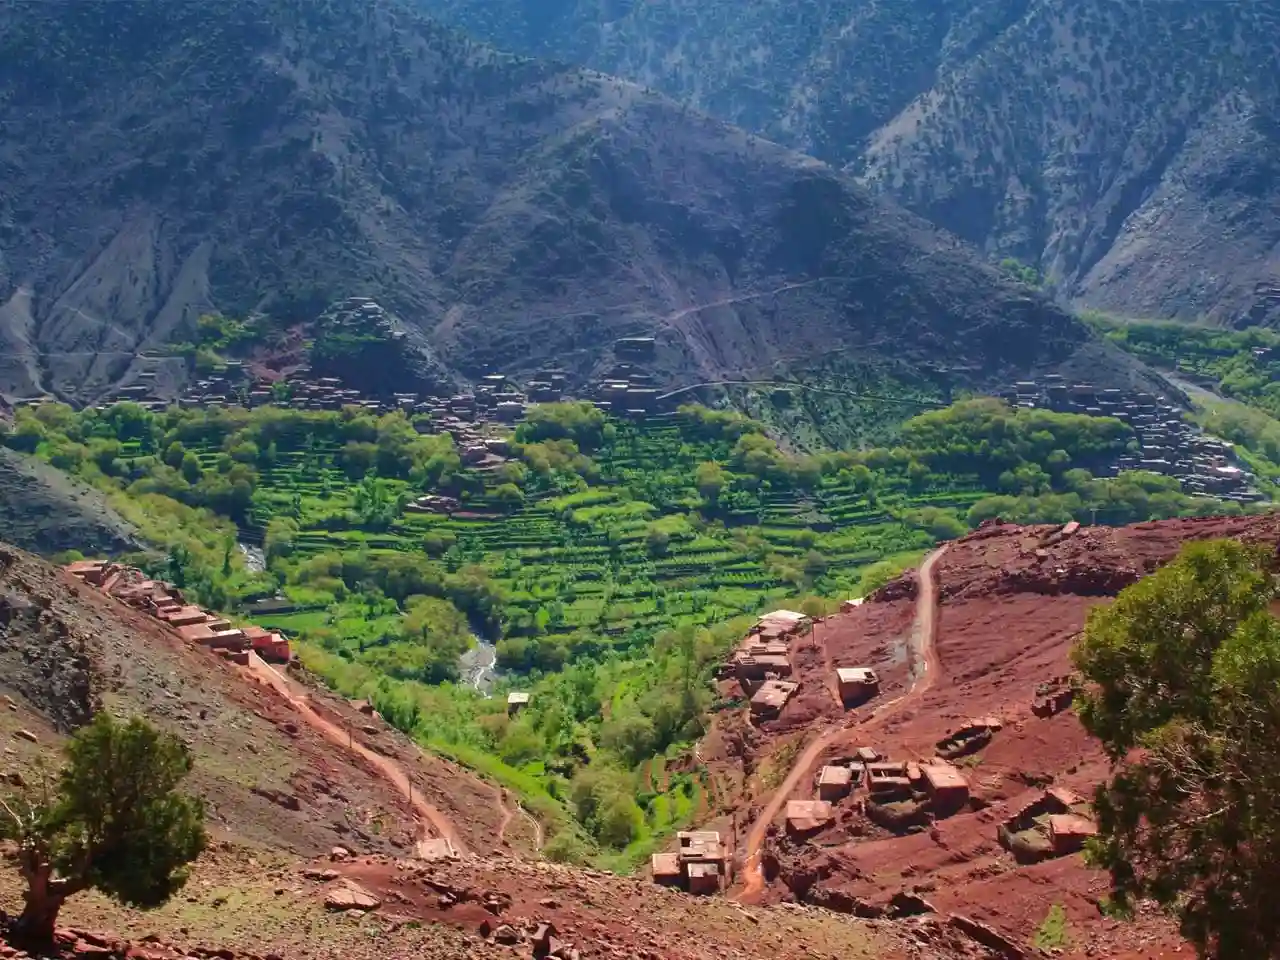 Embark on a captivating day trip to Imlil Valley! Immerse yourself in breathtaking mountain scenery, and discover the beauty of Morocco's Atlas Mountains